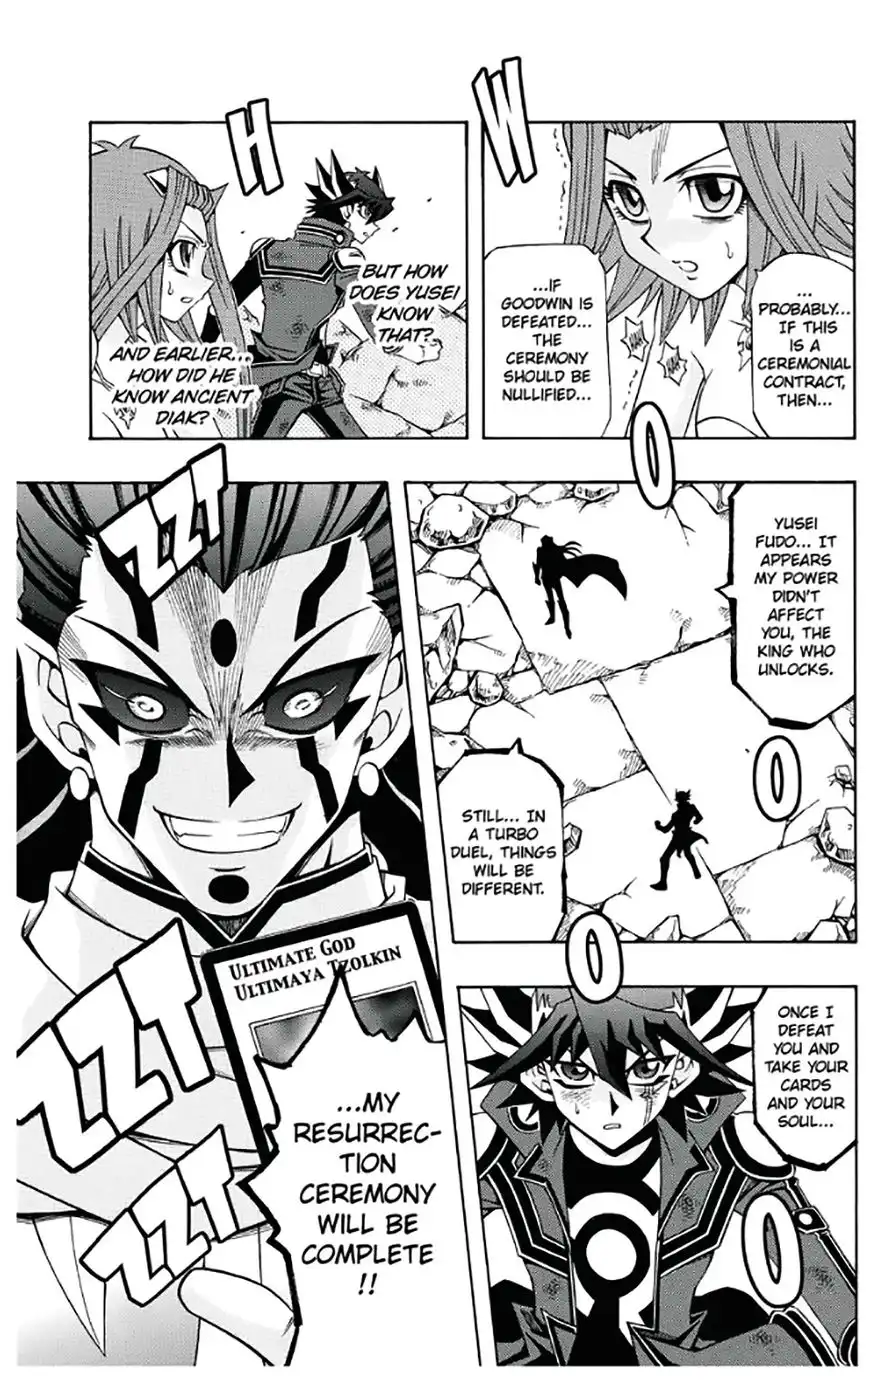 Yu-Gi-Oh! 5Ds - A Chapter 58